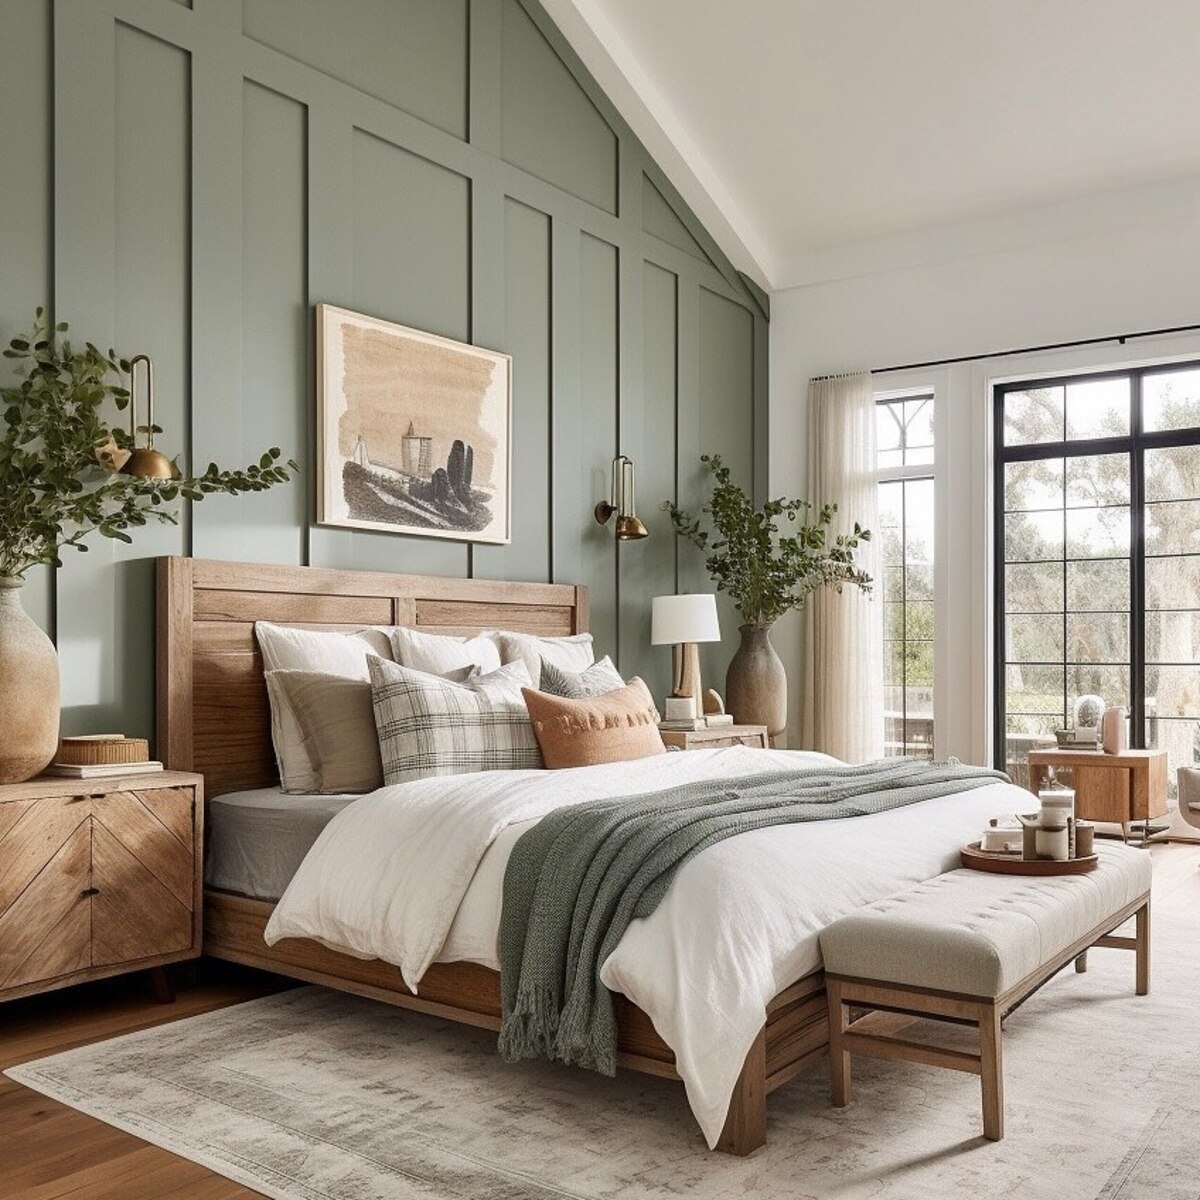 12 sage green and cream bedroom 4